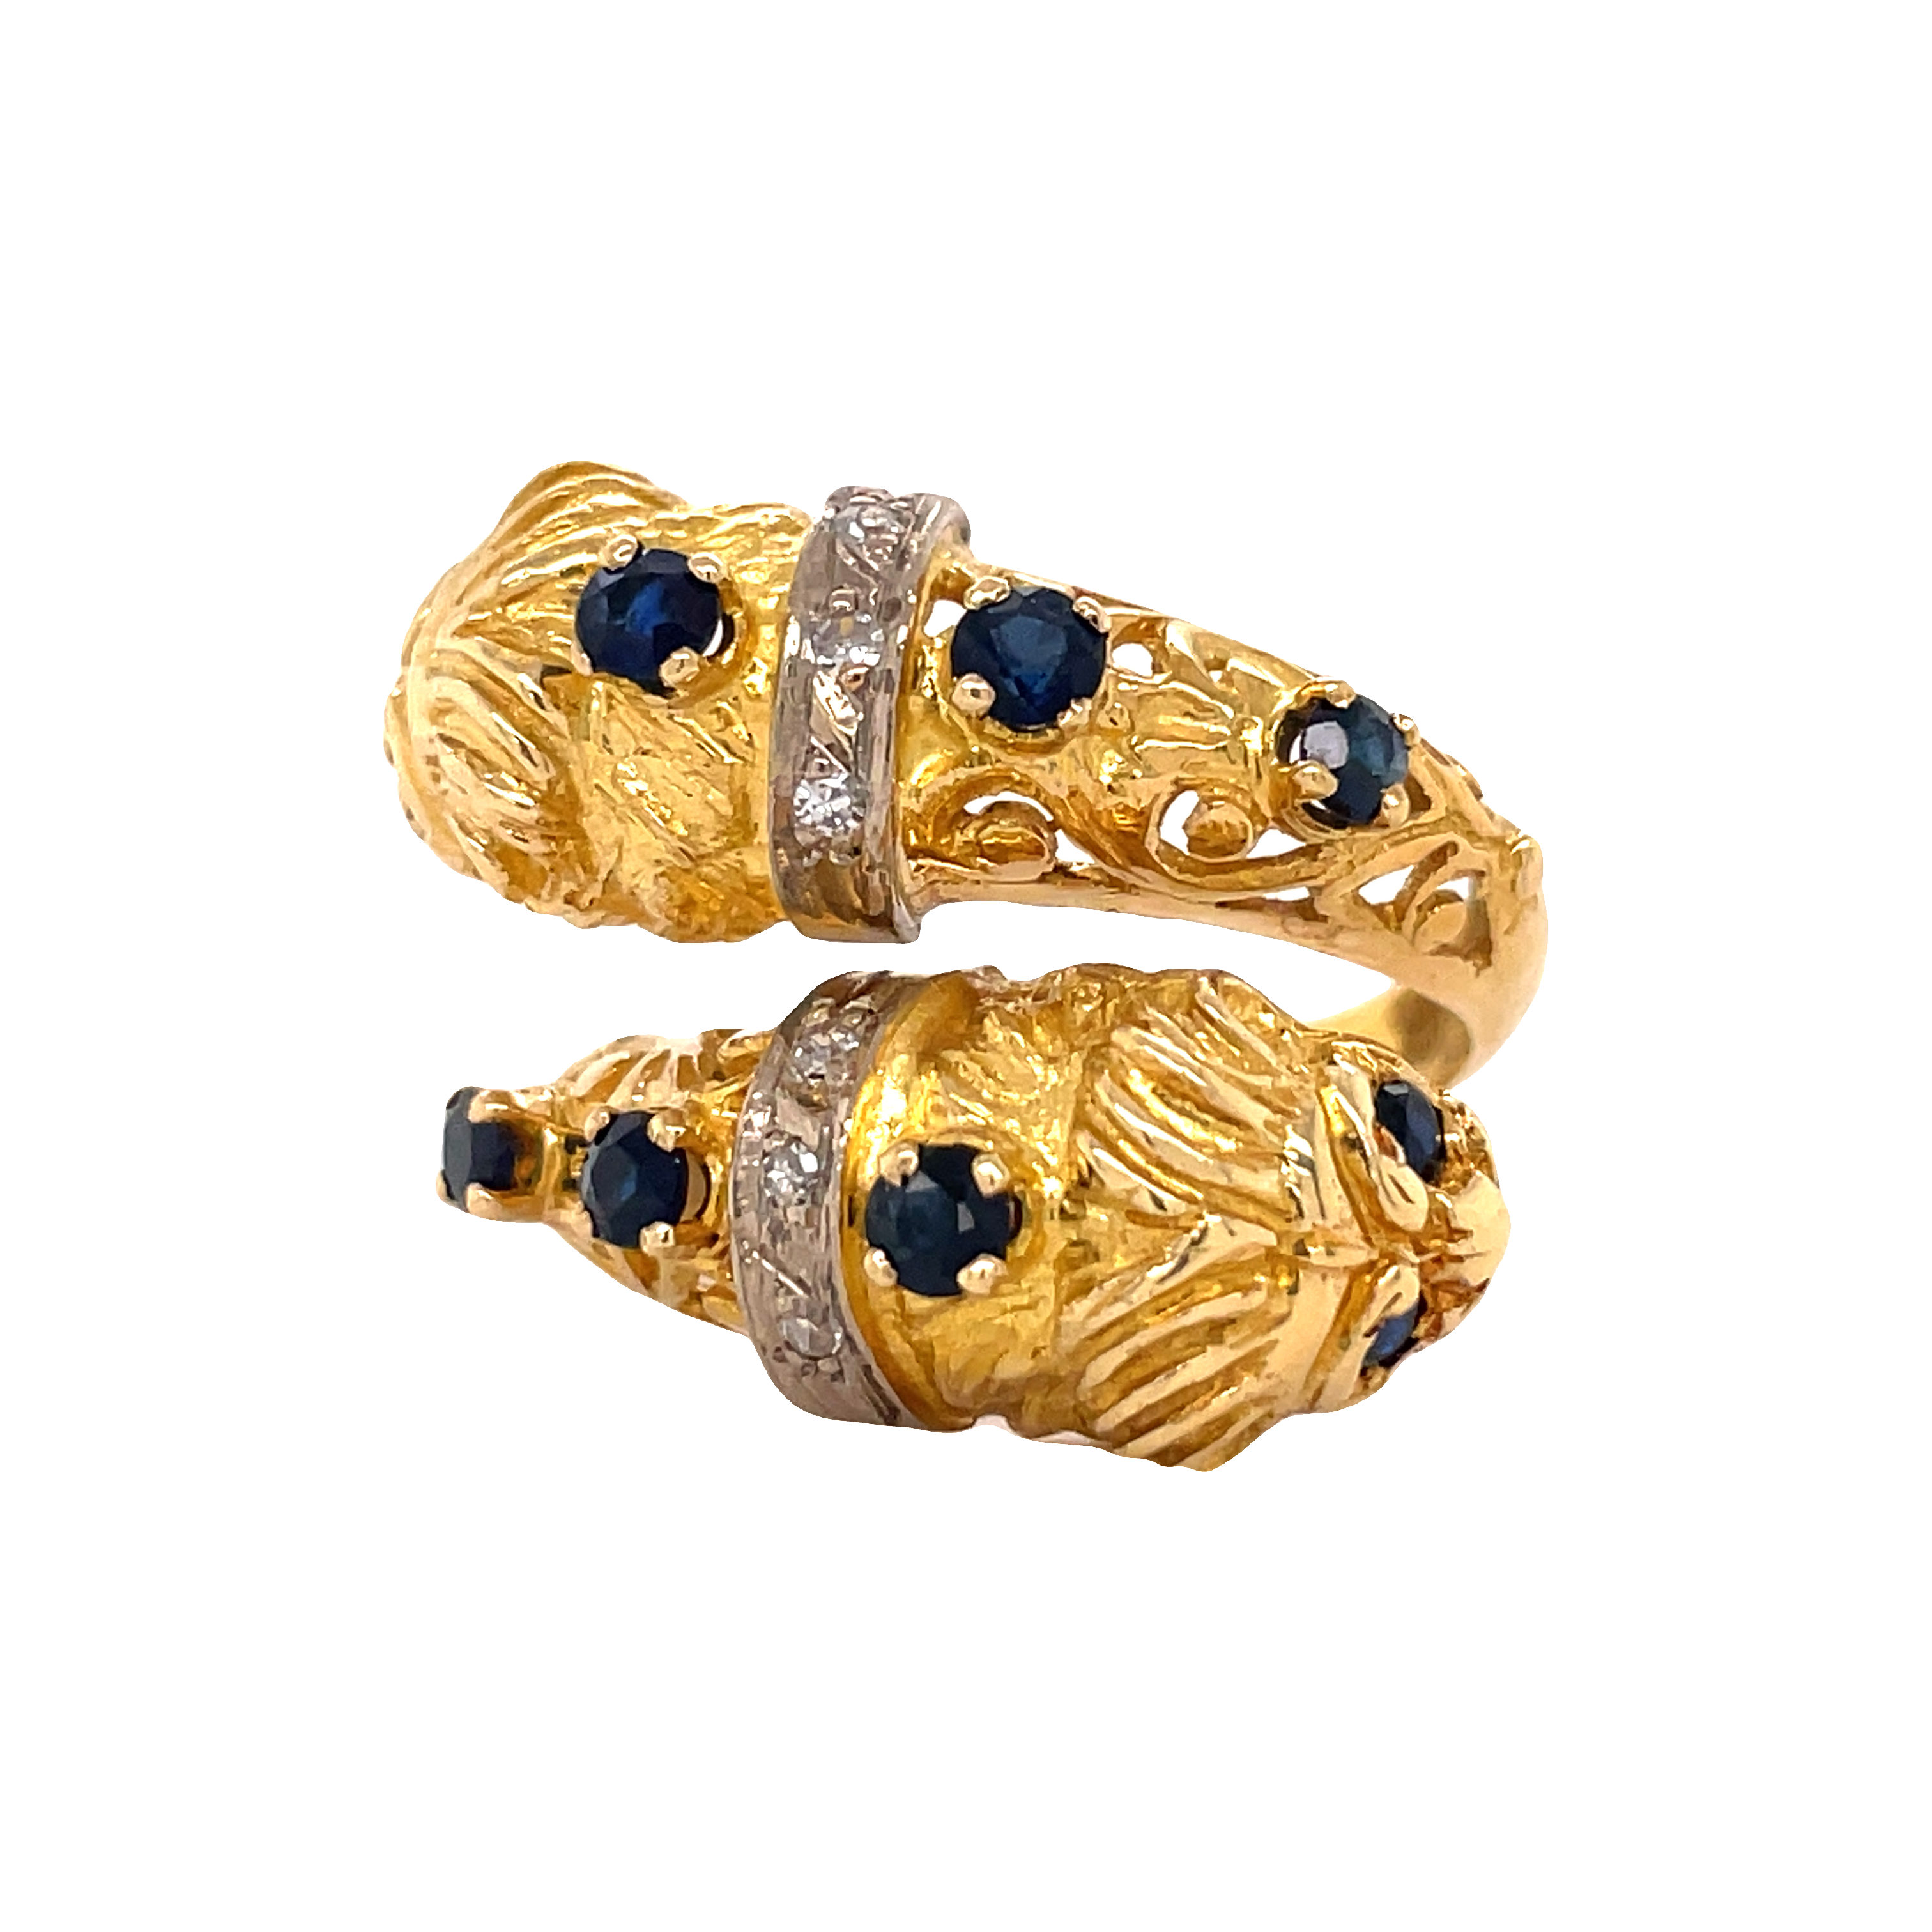 Beautiful estate jewelry ring.  14k yellow gold antique ring  Round diamonds   Round sapphires   Great condition.  Crossover lion faces